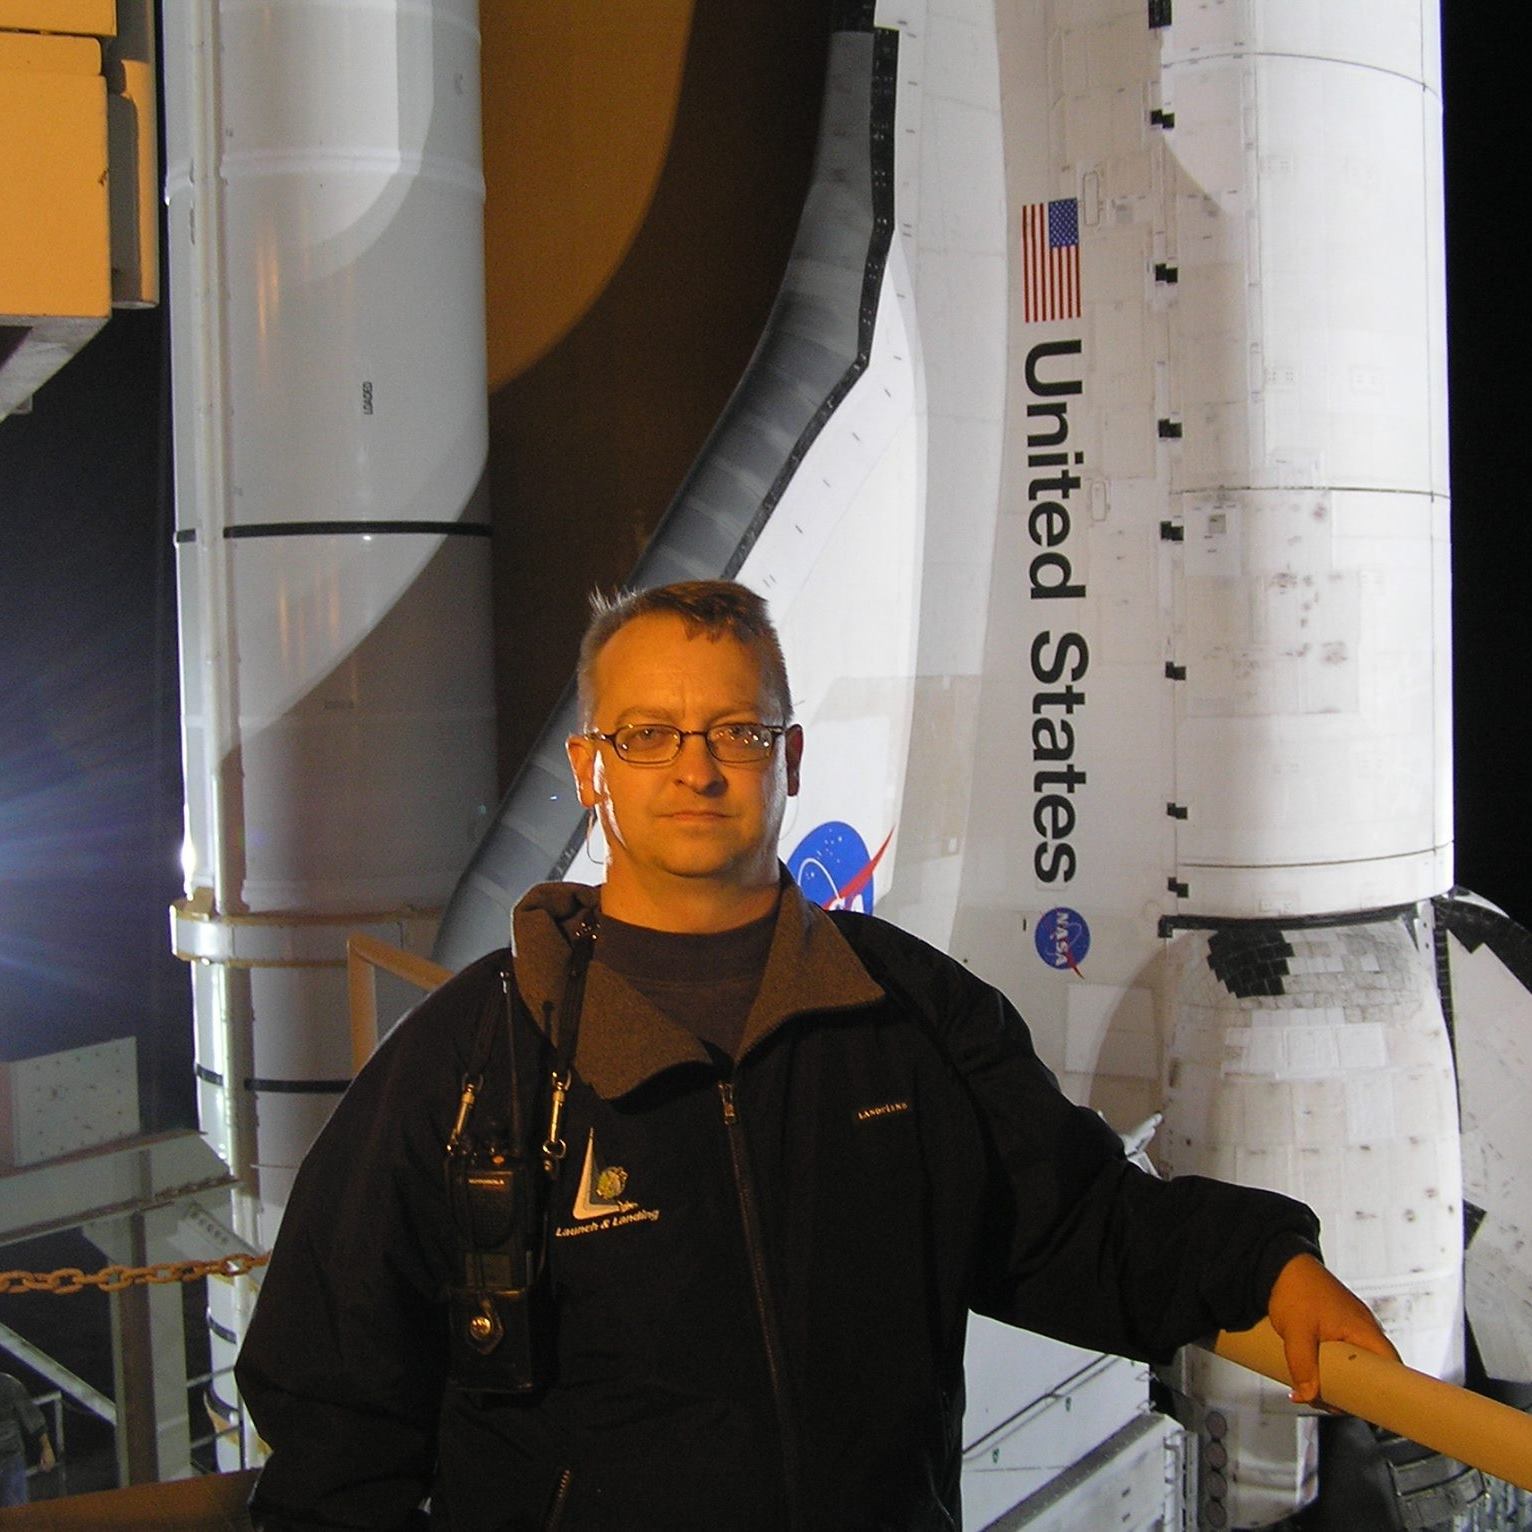 Brett Perkins has worked at Kennedy Space Center since 1990